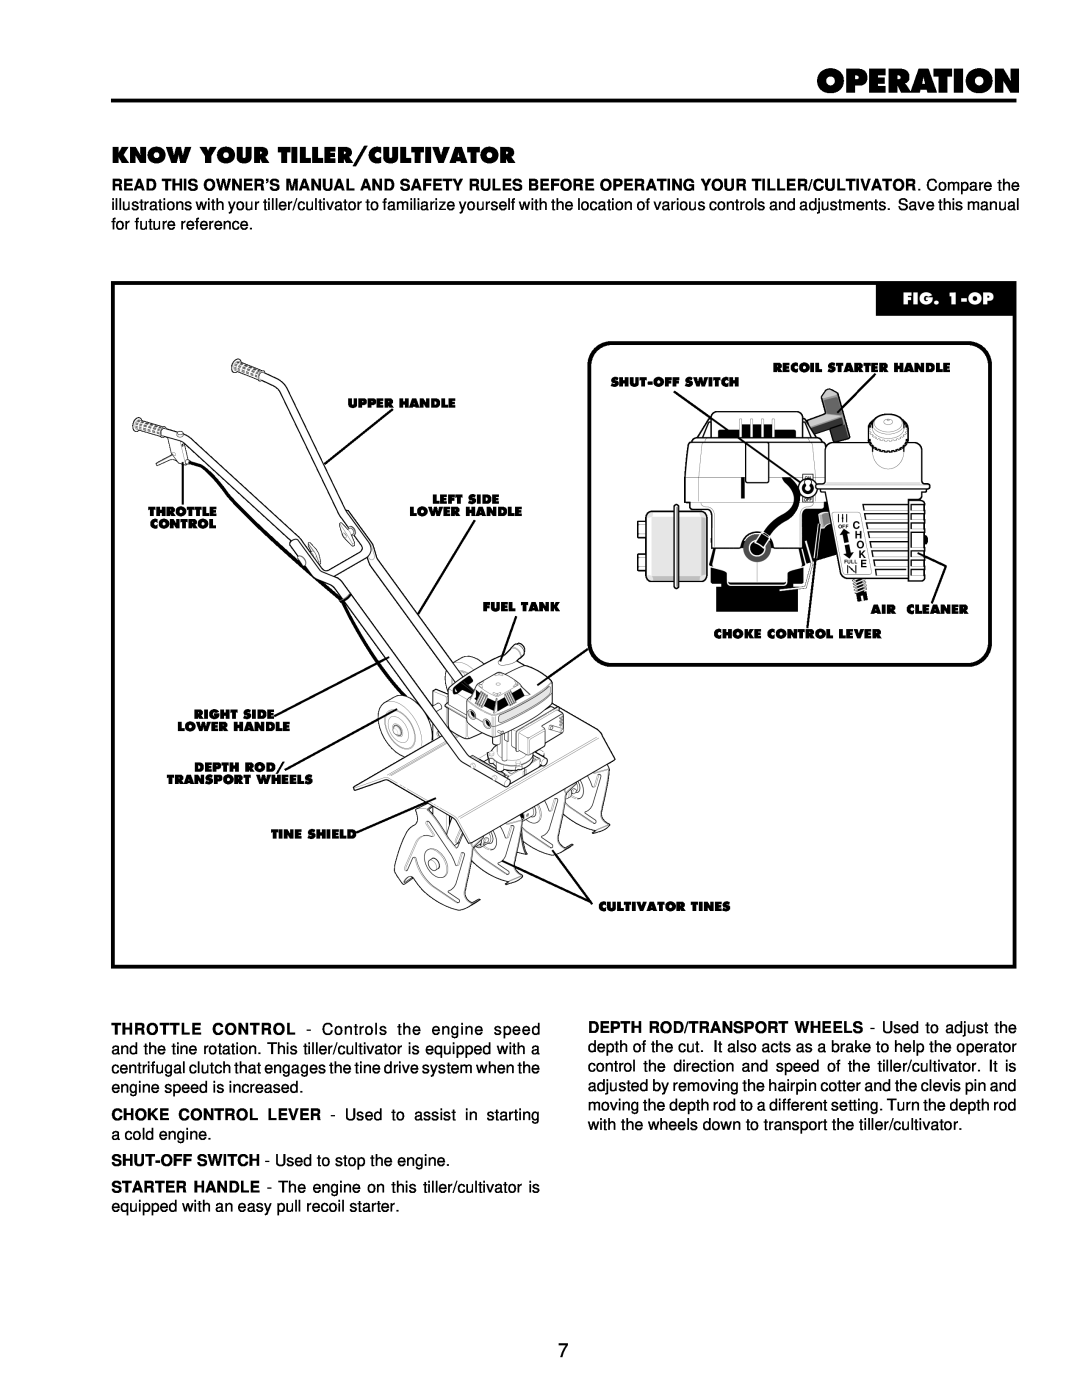 Husqvarna CT16 owner manual Operation, Know Your Tiller/Cultivator 